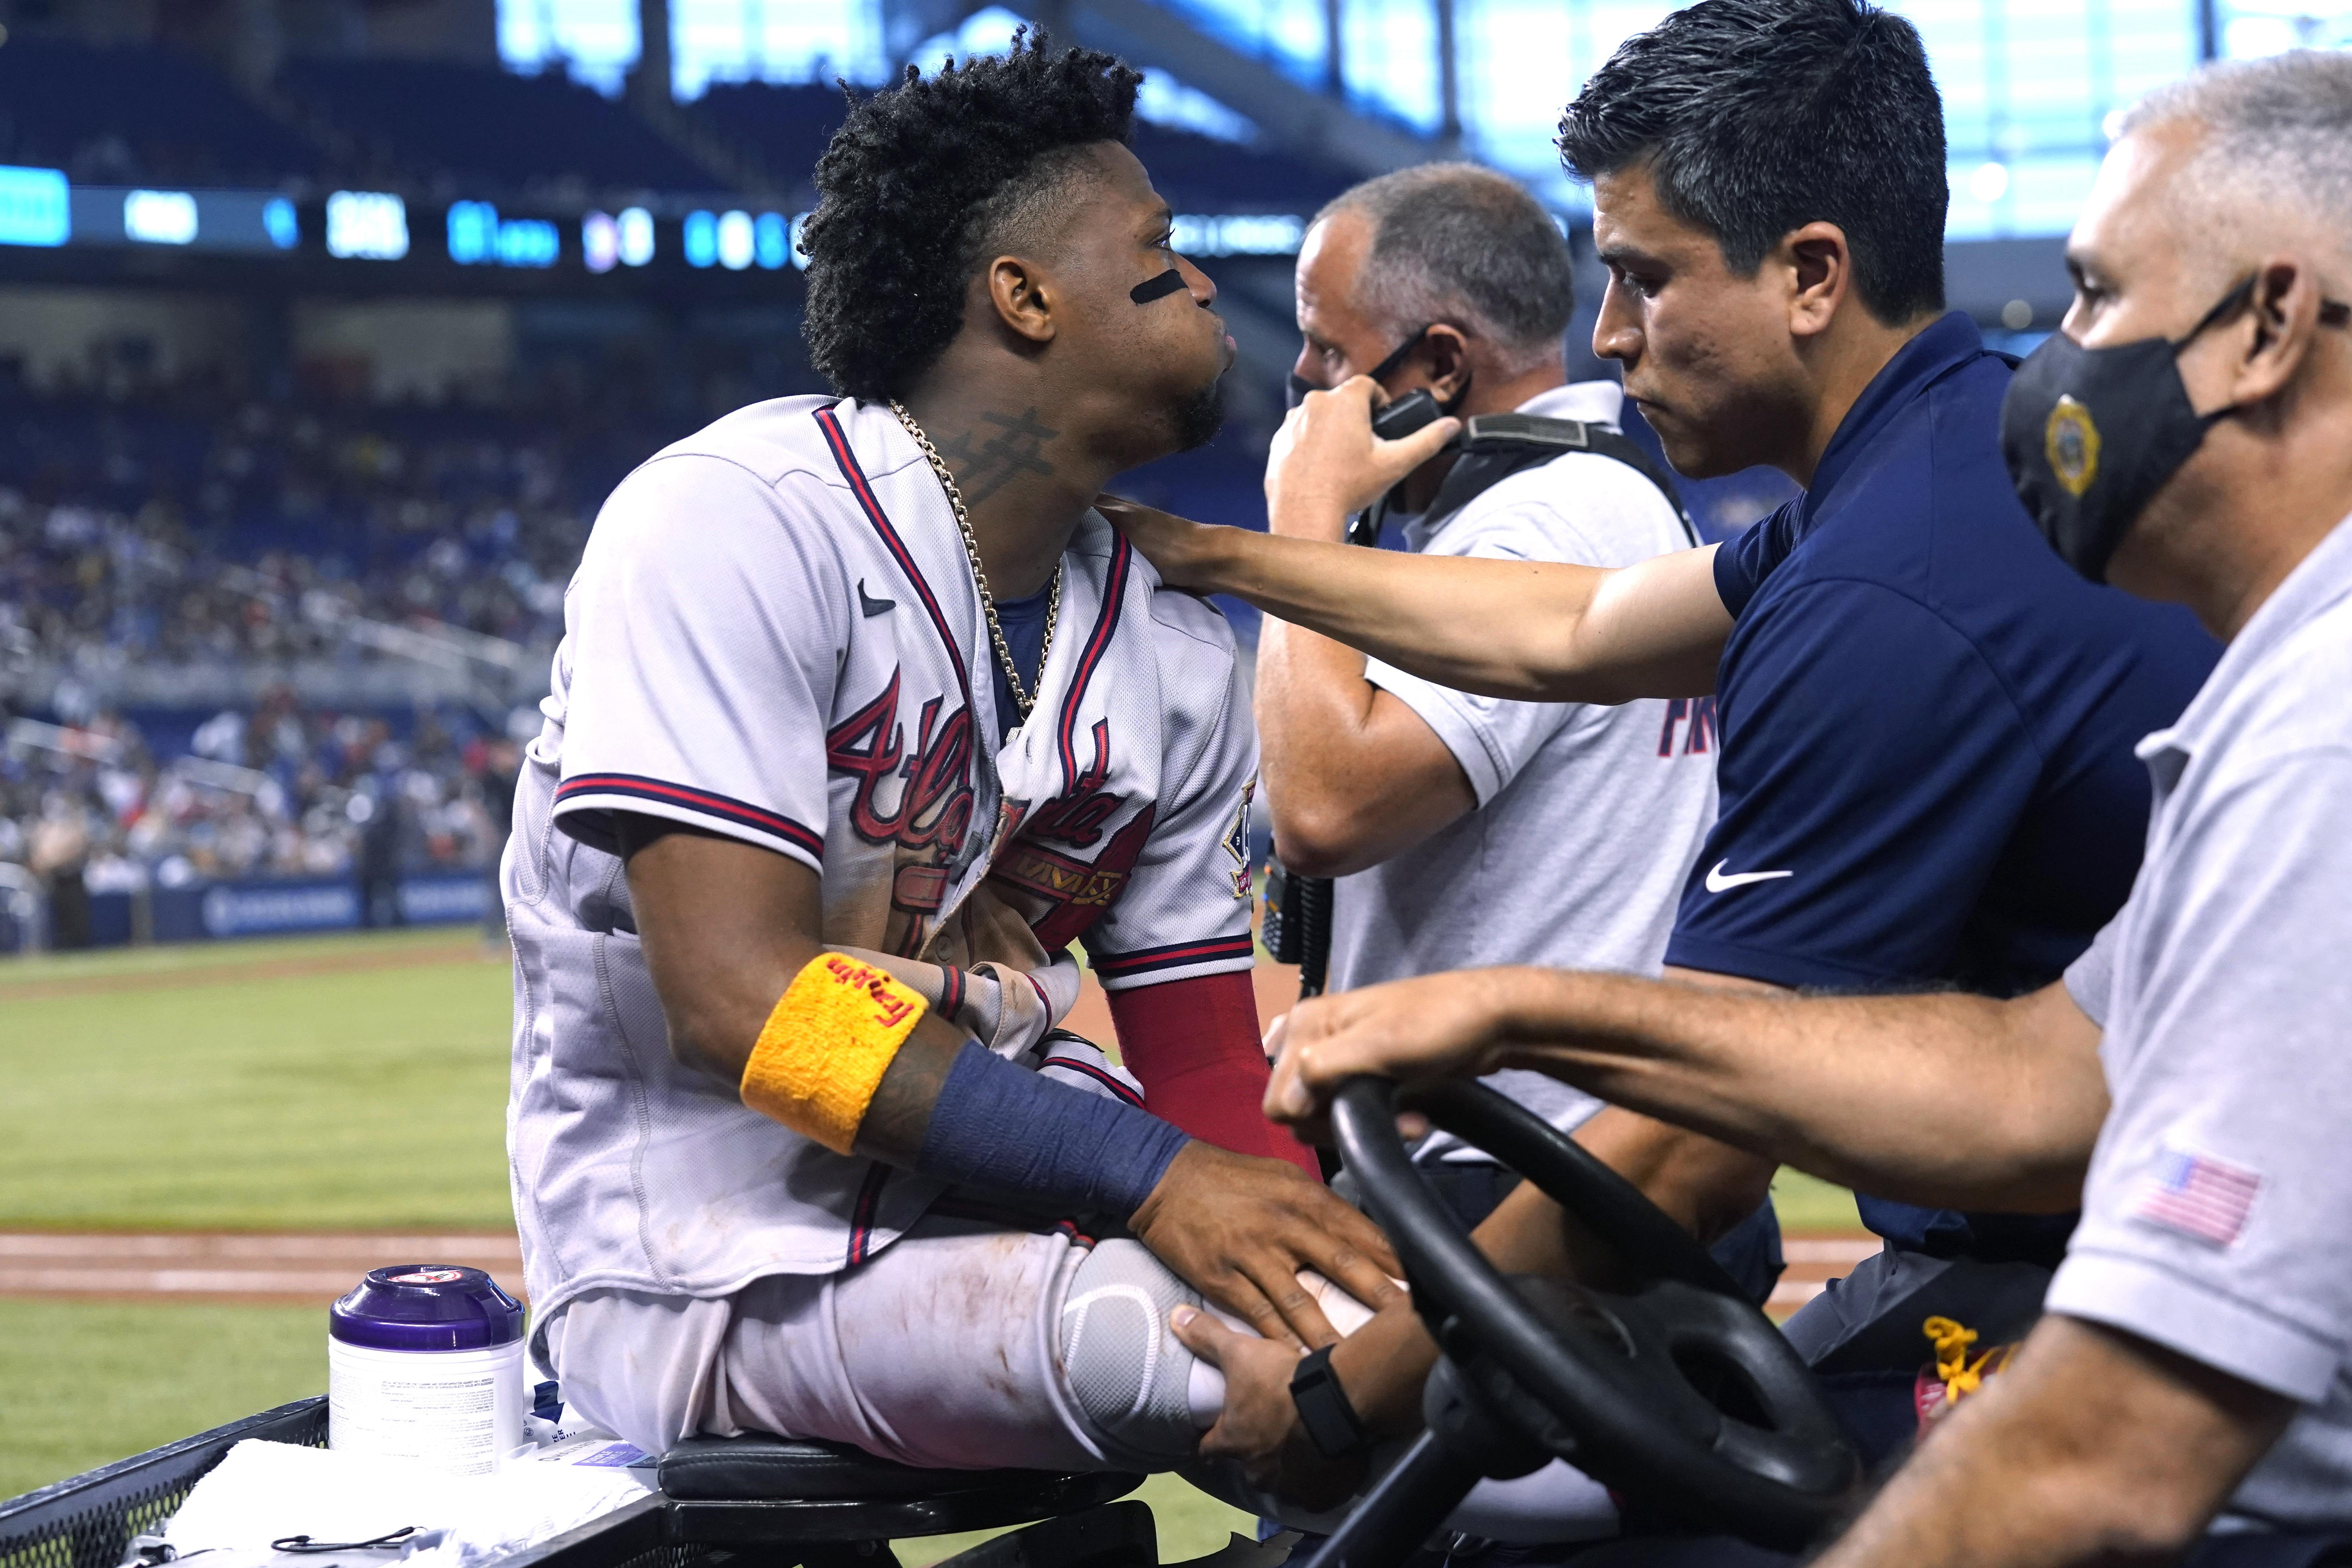 Braves star Ronald Acuna Jr. dealing with right knee irritation